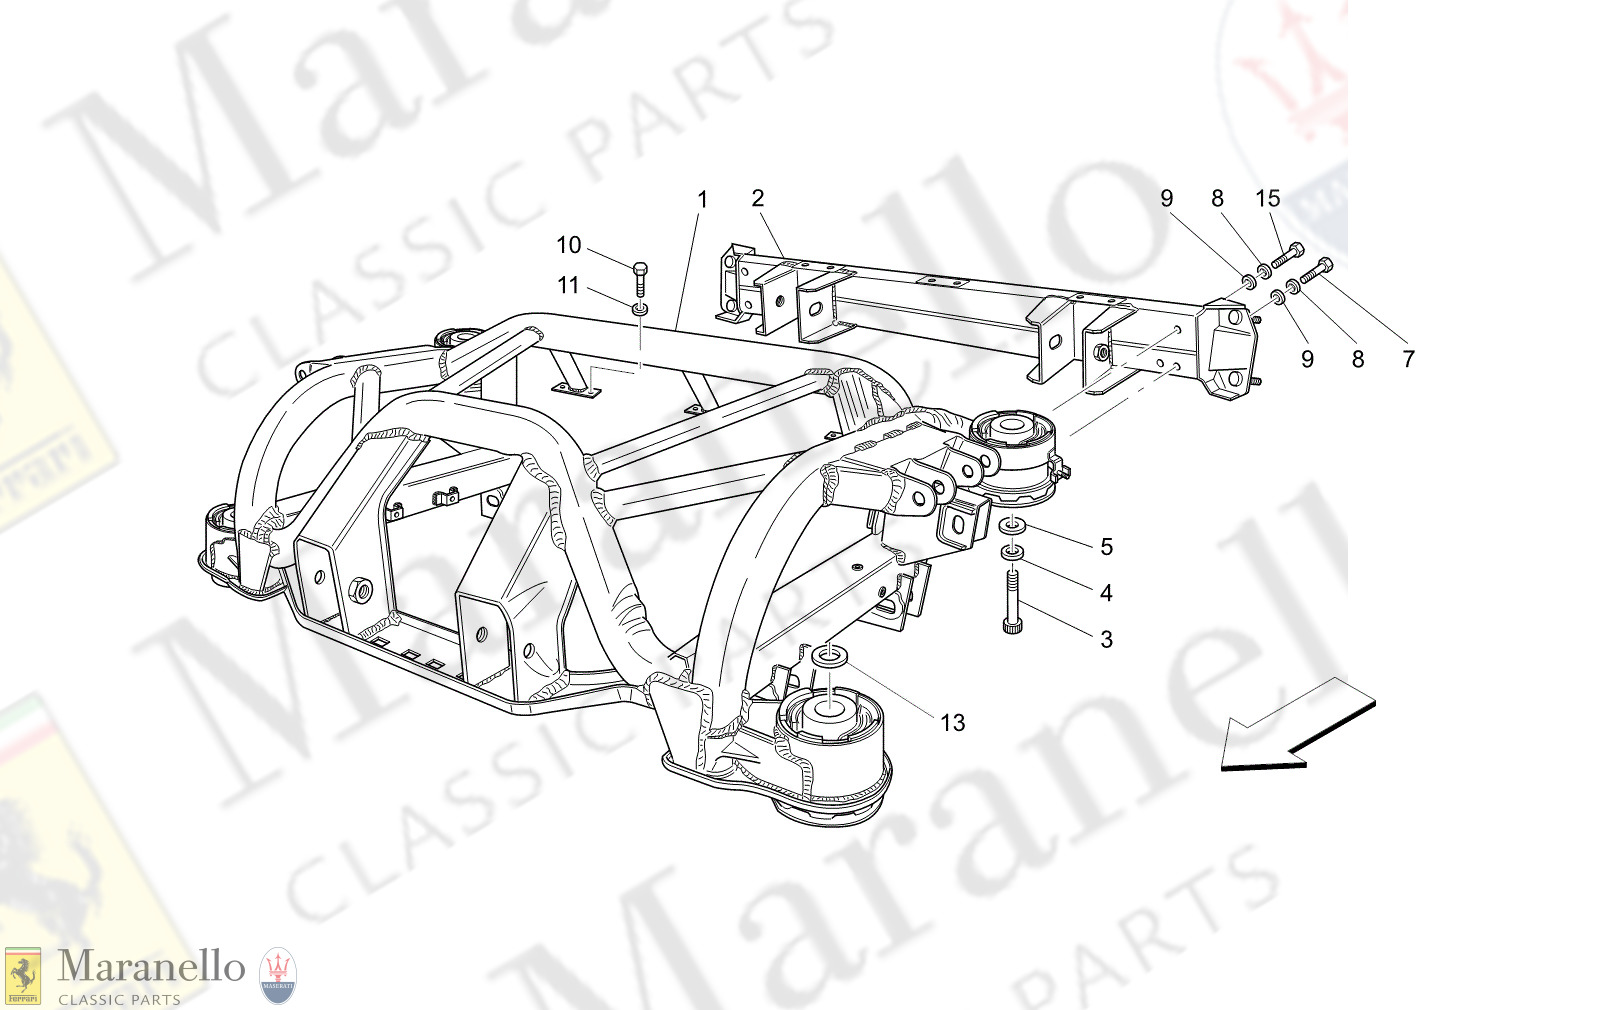 06.22 - 11 - 0622 - 11 Rear Chassis